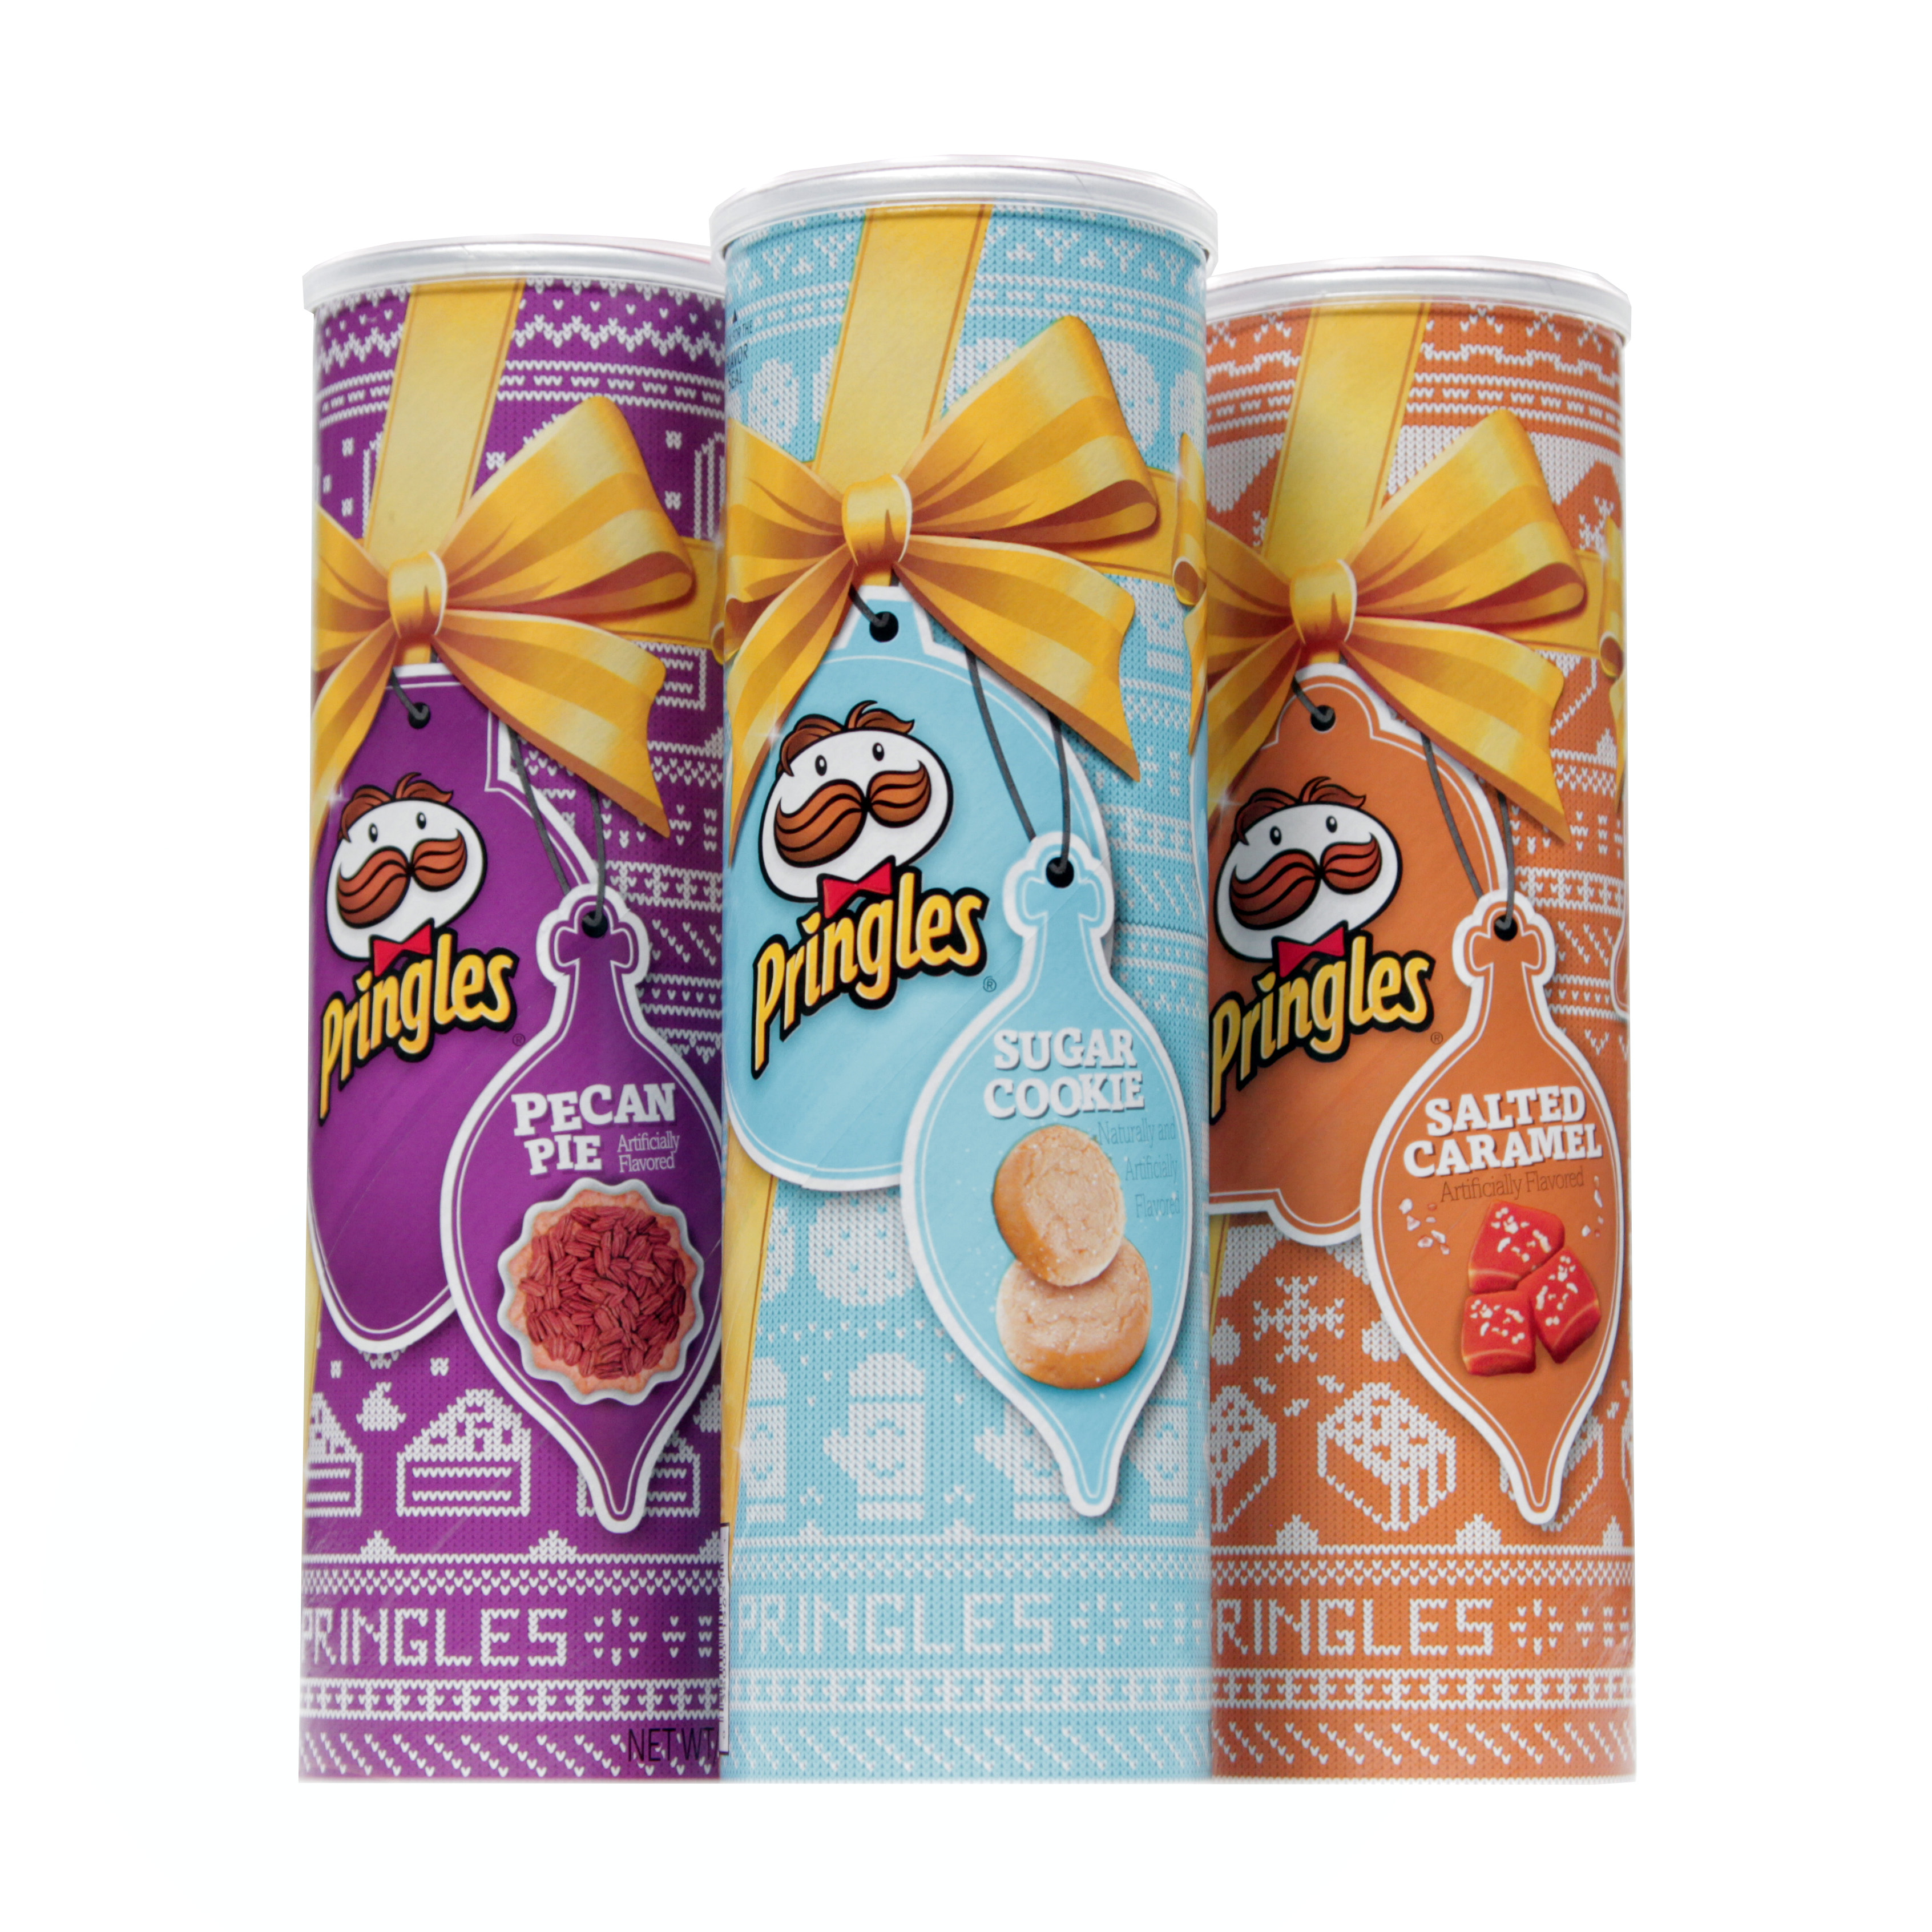 Just What We Needed: Another Holiday-Themed Dessert Pringles Flavor